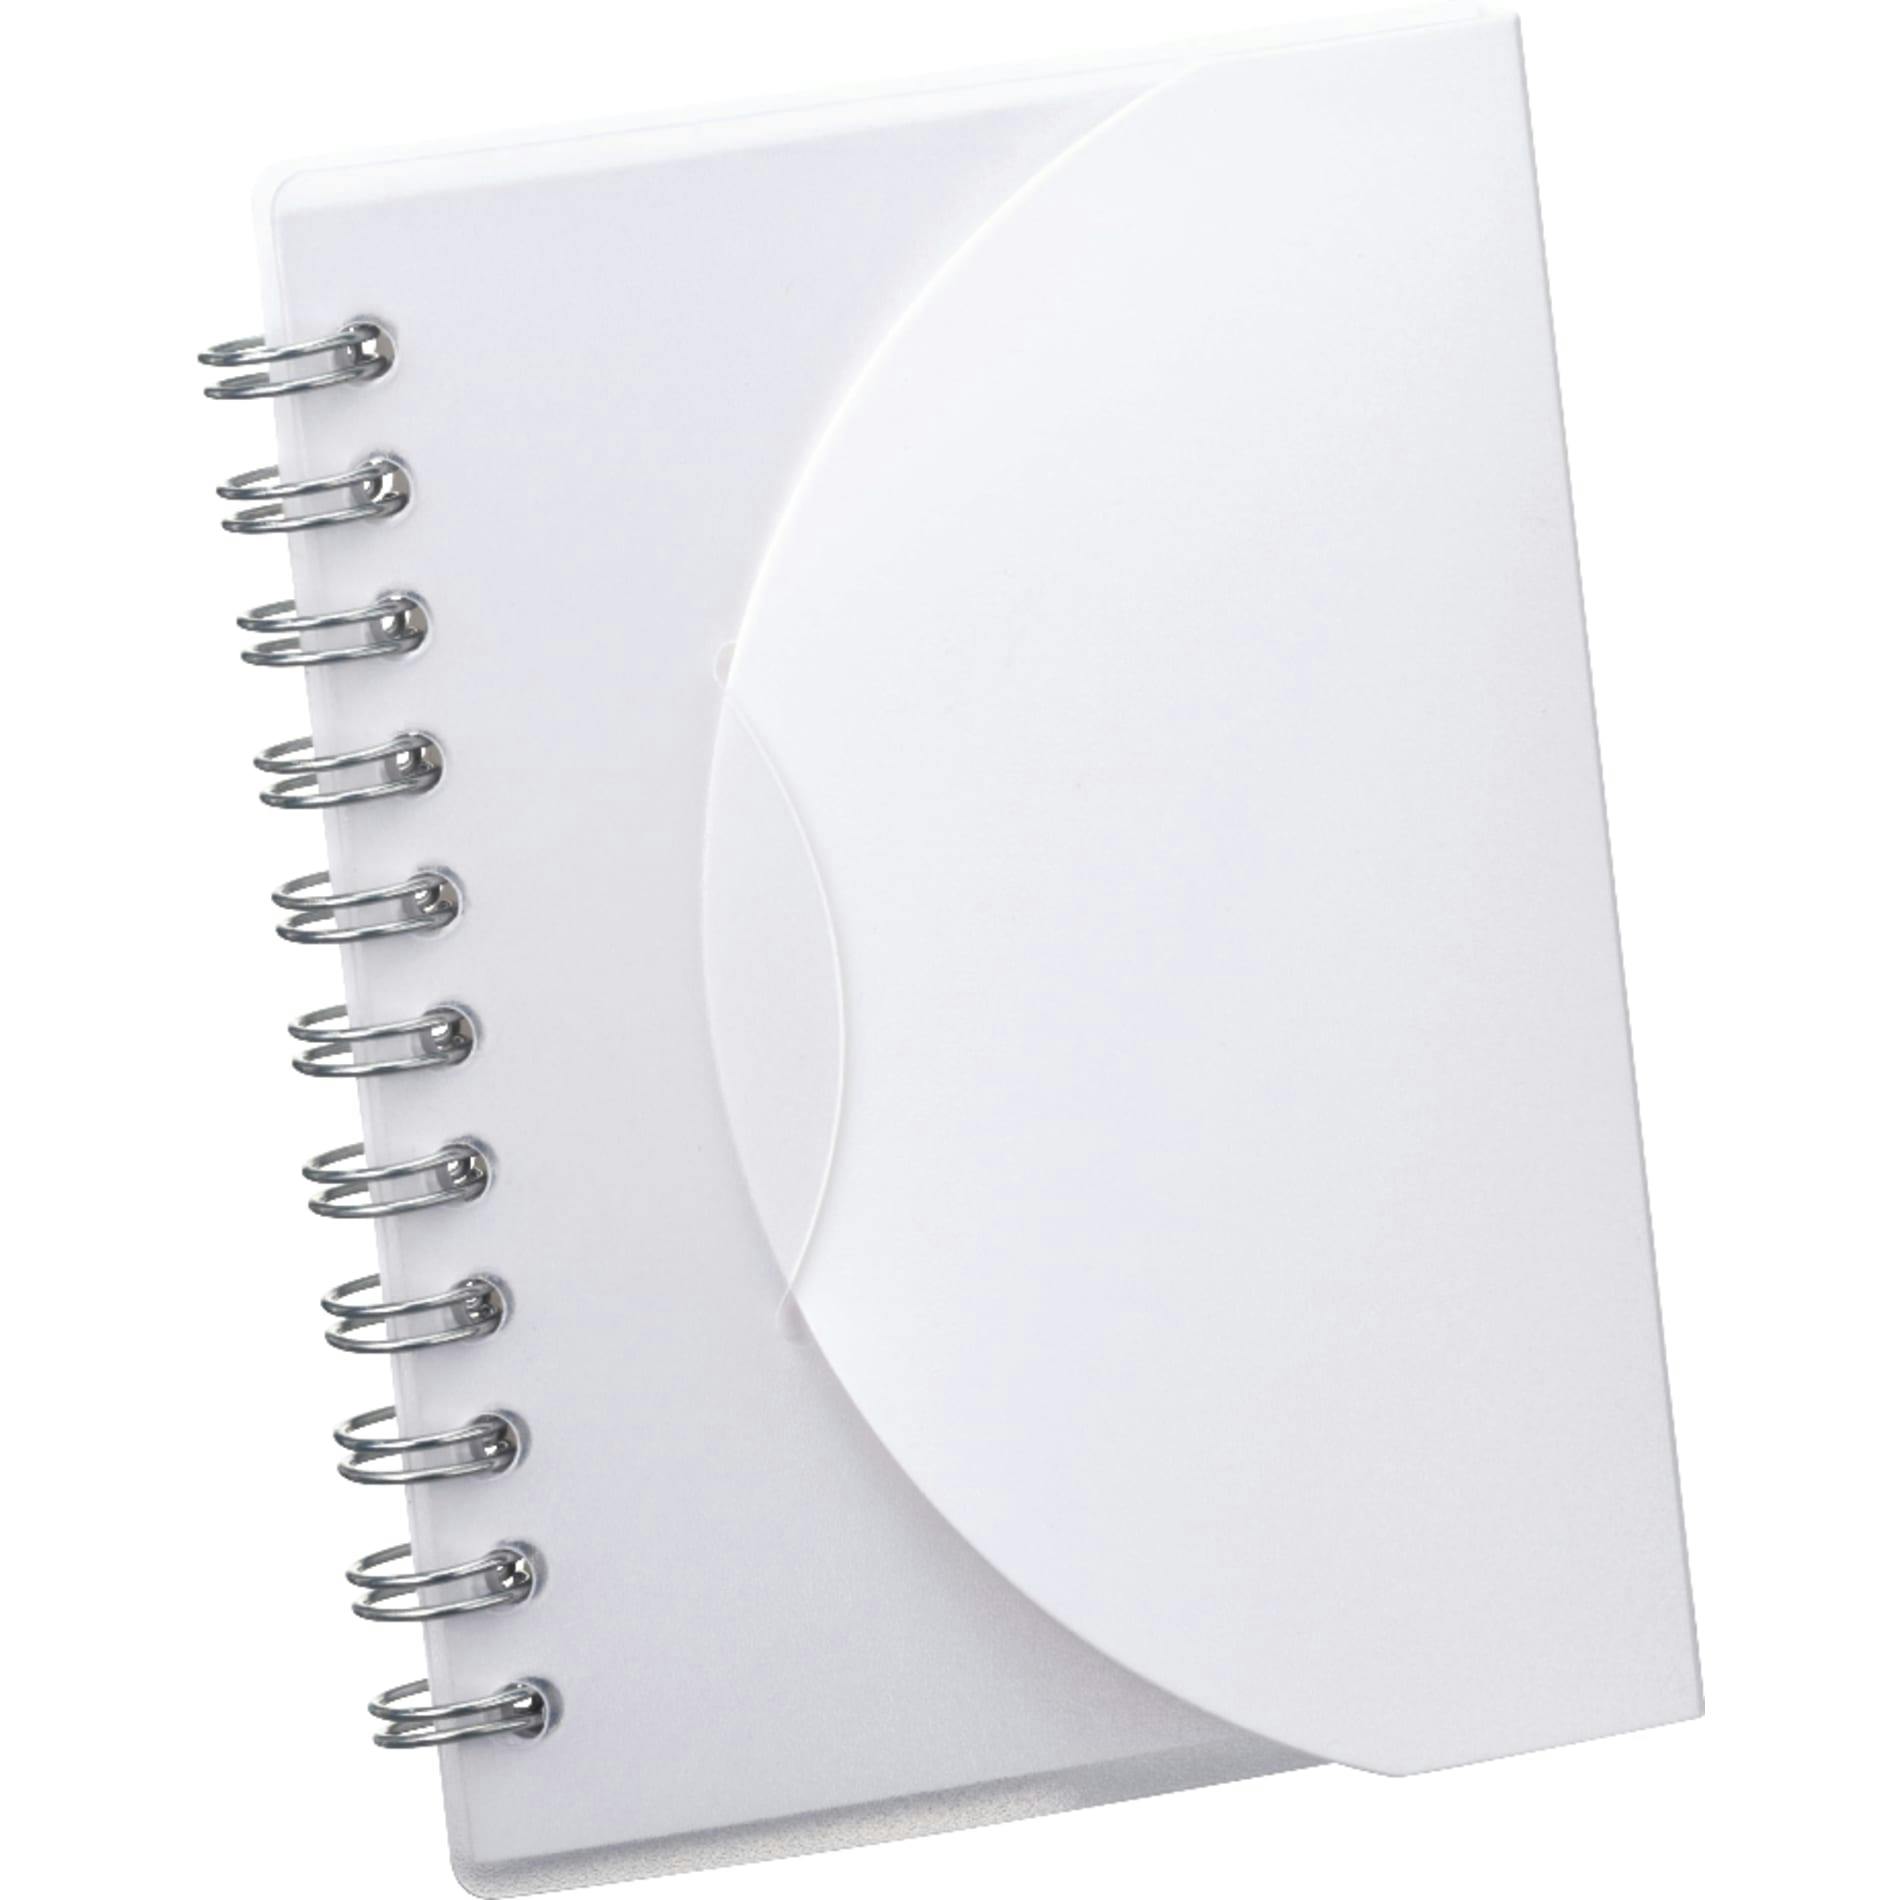 3" x 4.5" Post Spiral Notebook - additional Image 2